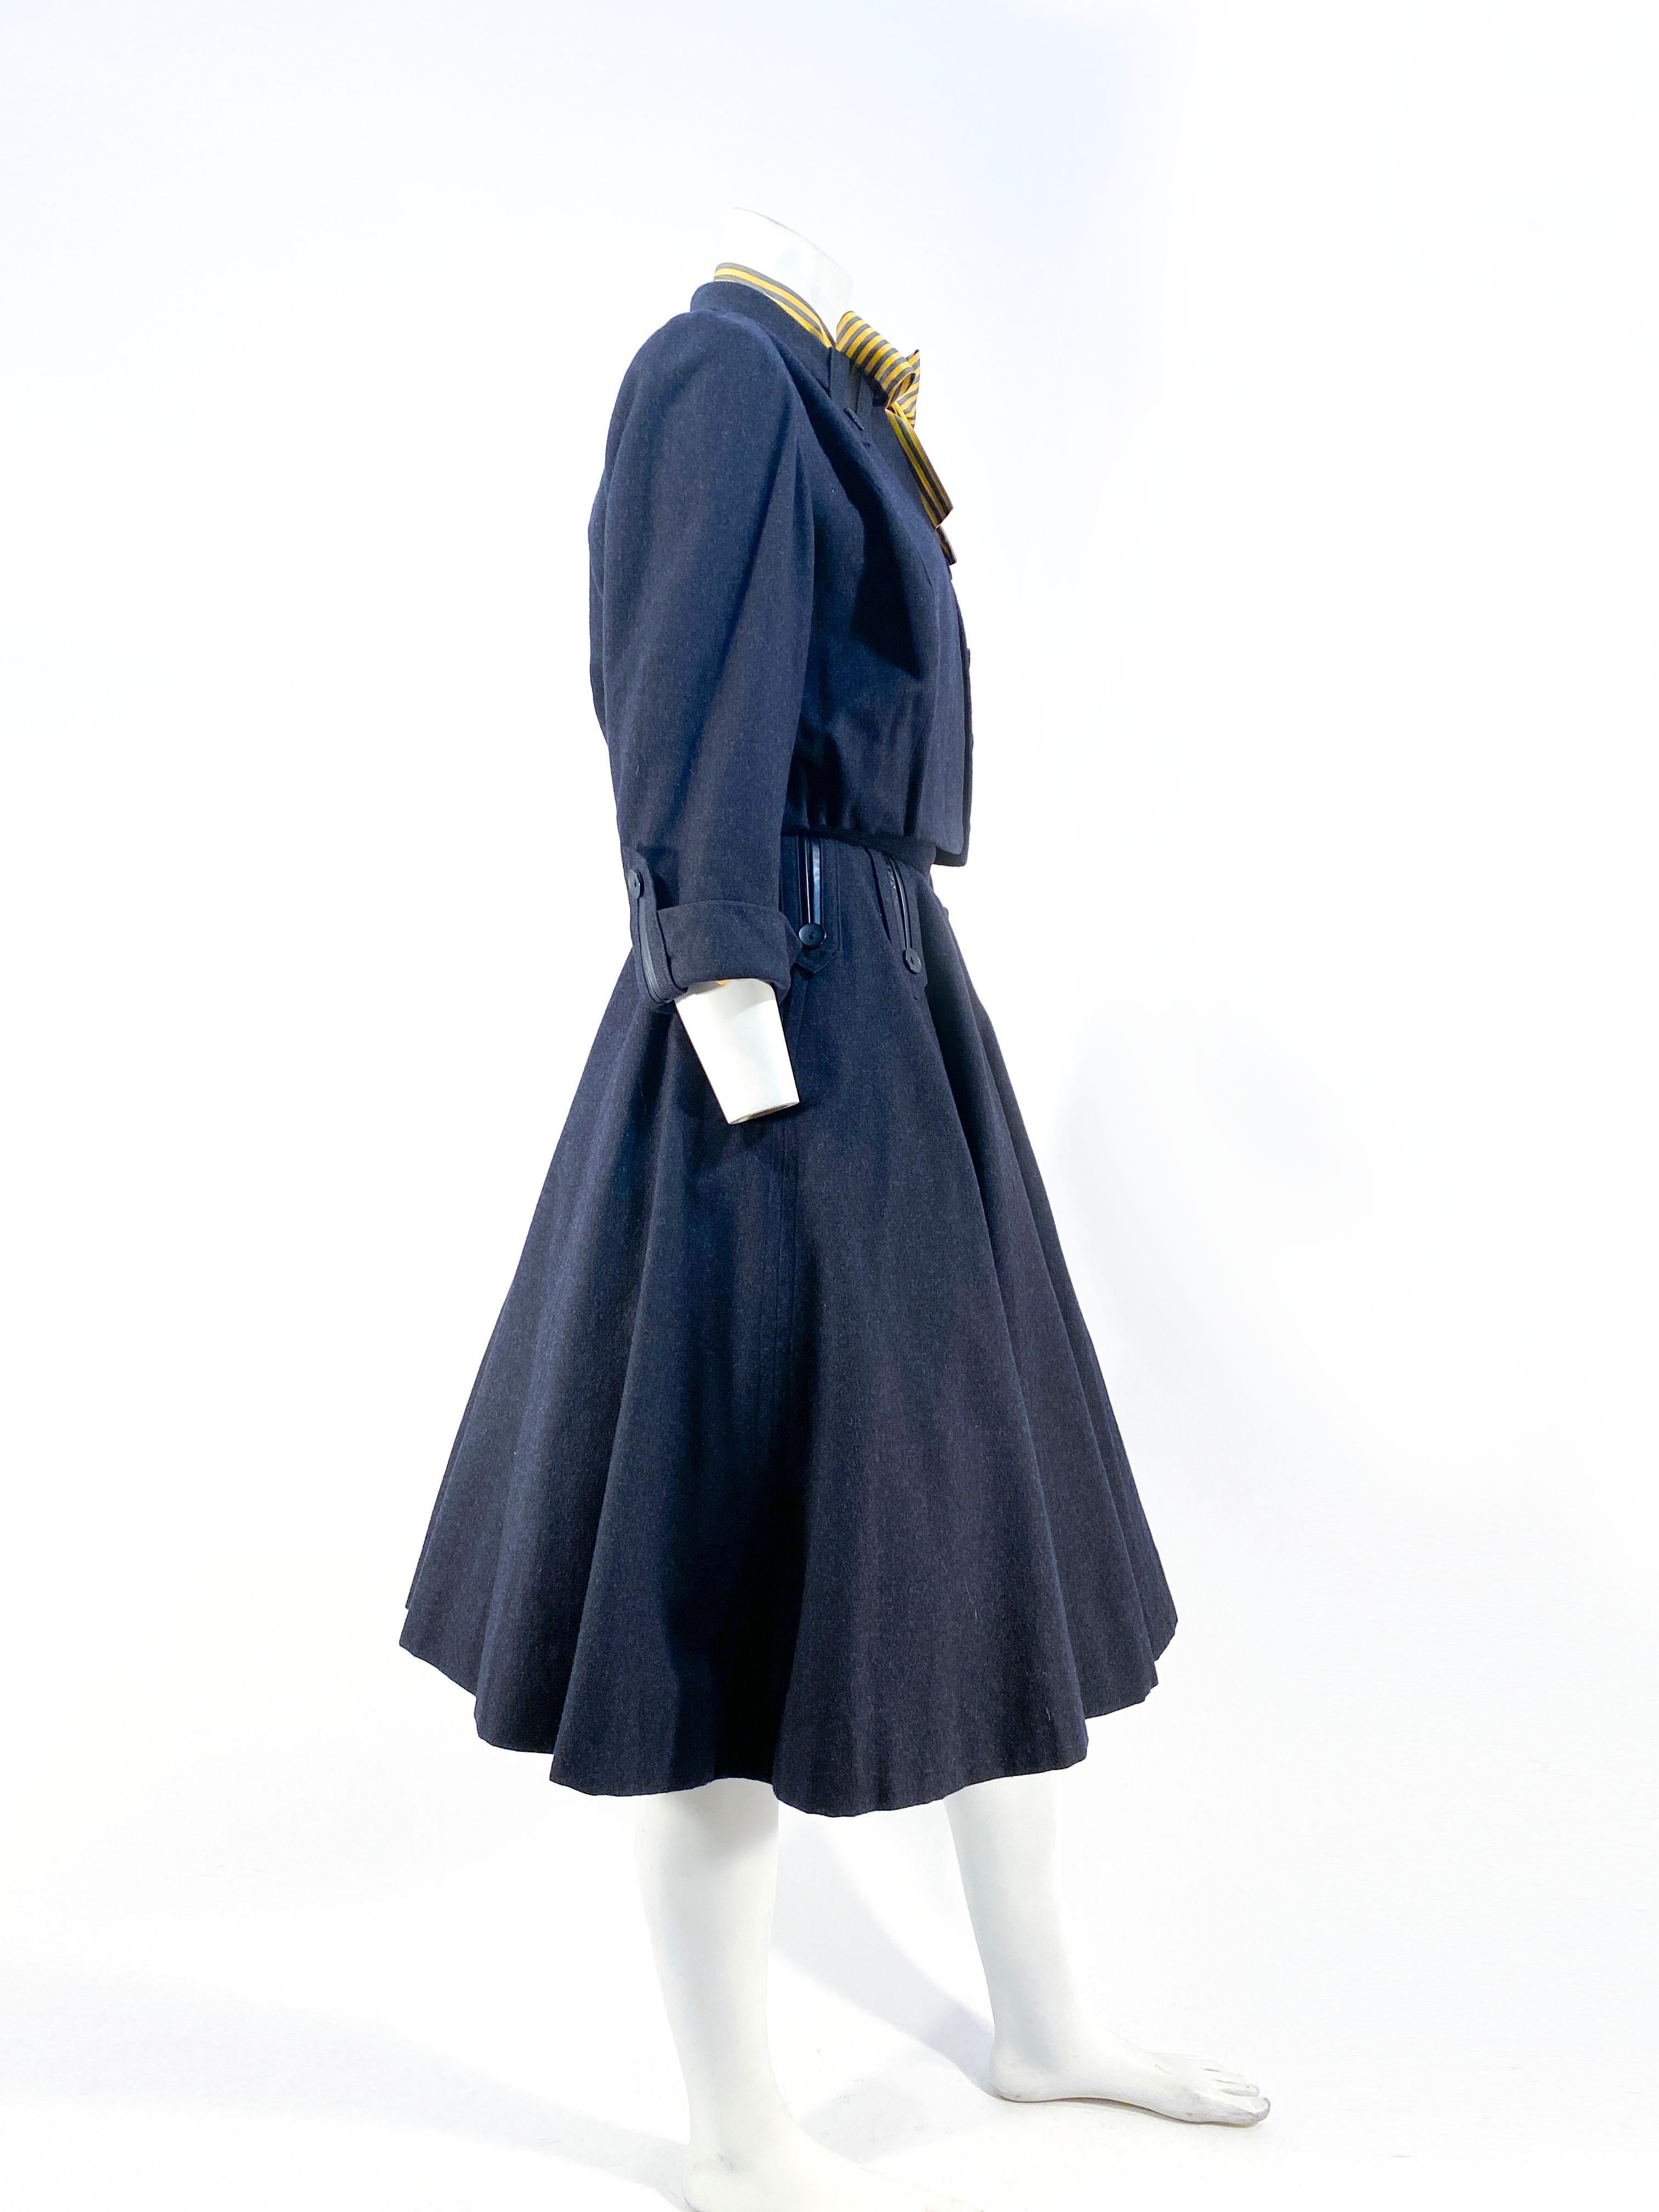 1950s grey cashmere/wool blend three-piece set including the full circle skirt with leather and wool tapers with button accents. The copped jacket has three-quarter length cuffed sleeves with matching tapper accents along the cuffs and collar. The